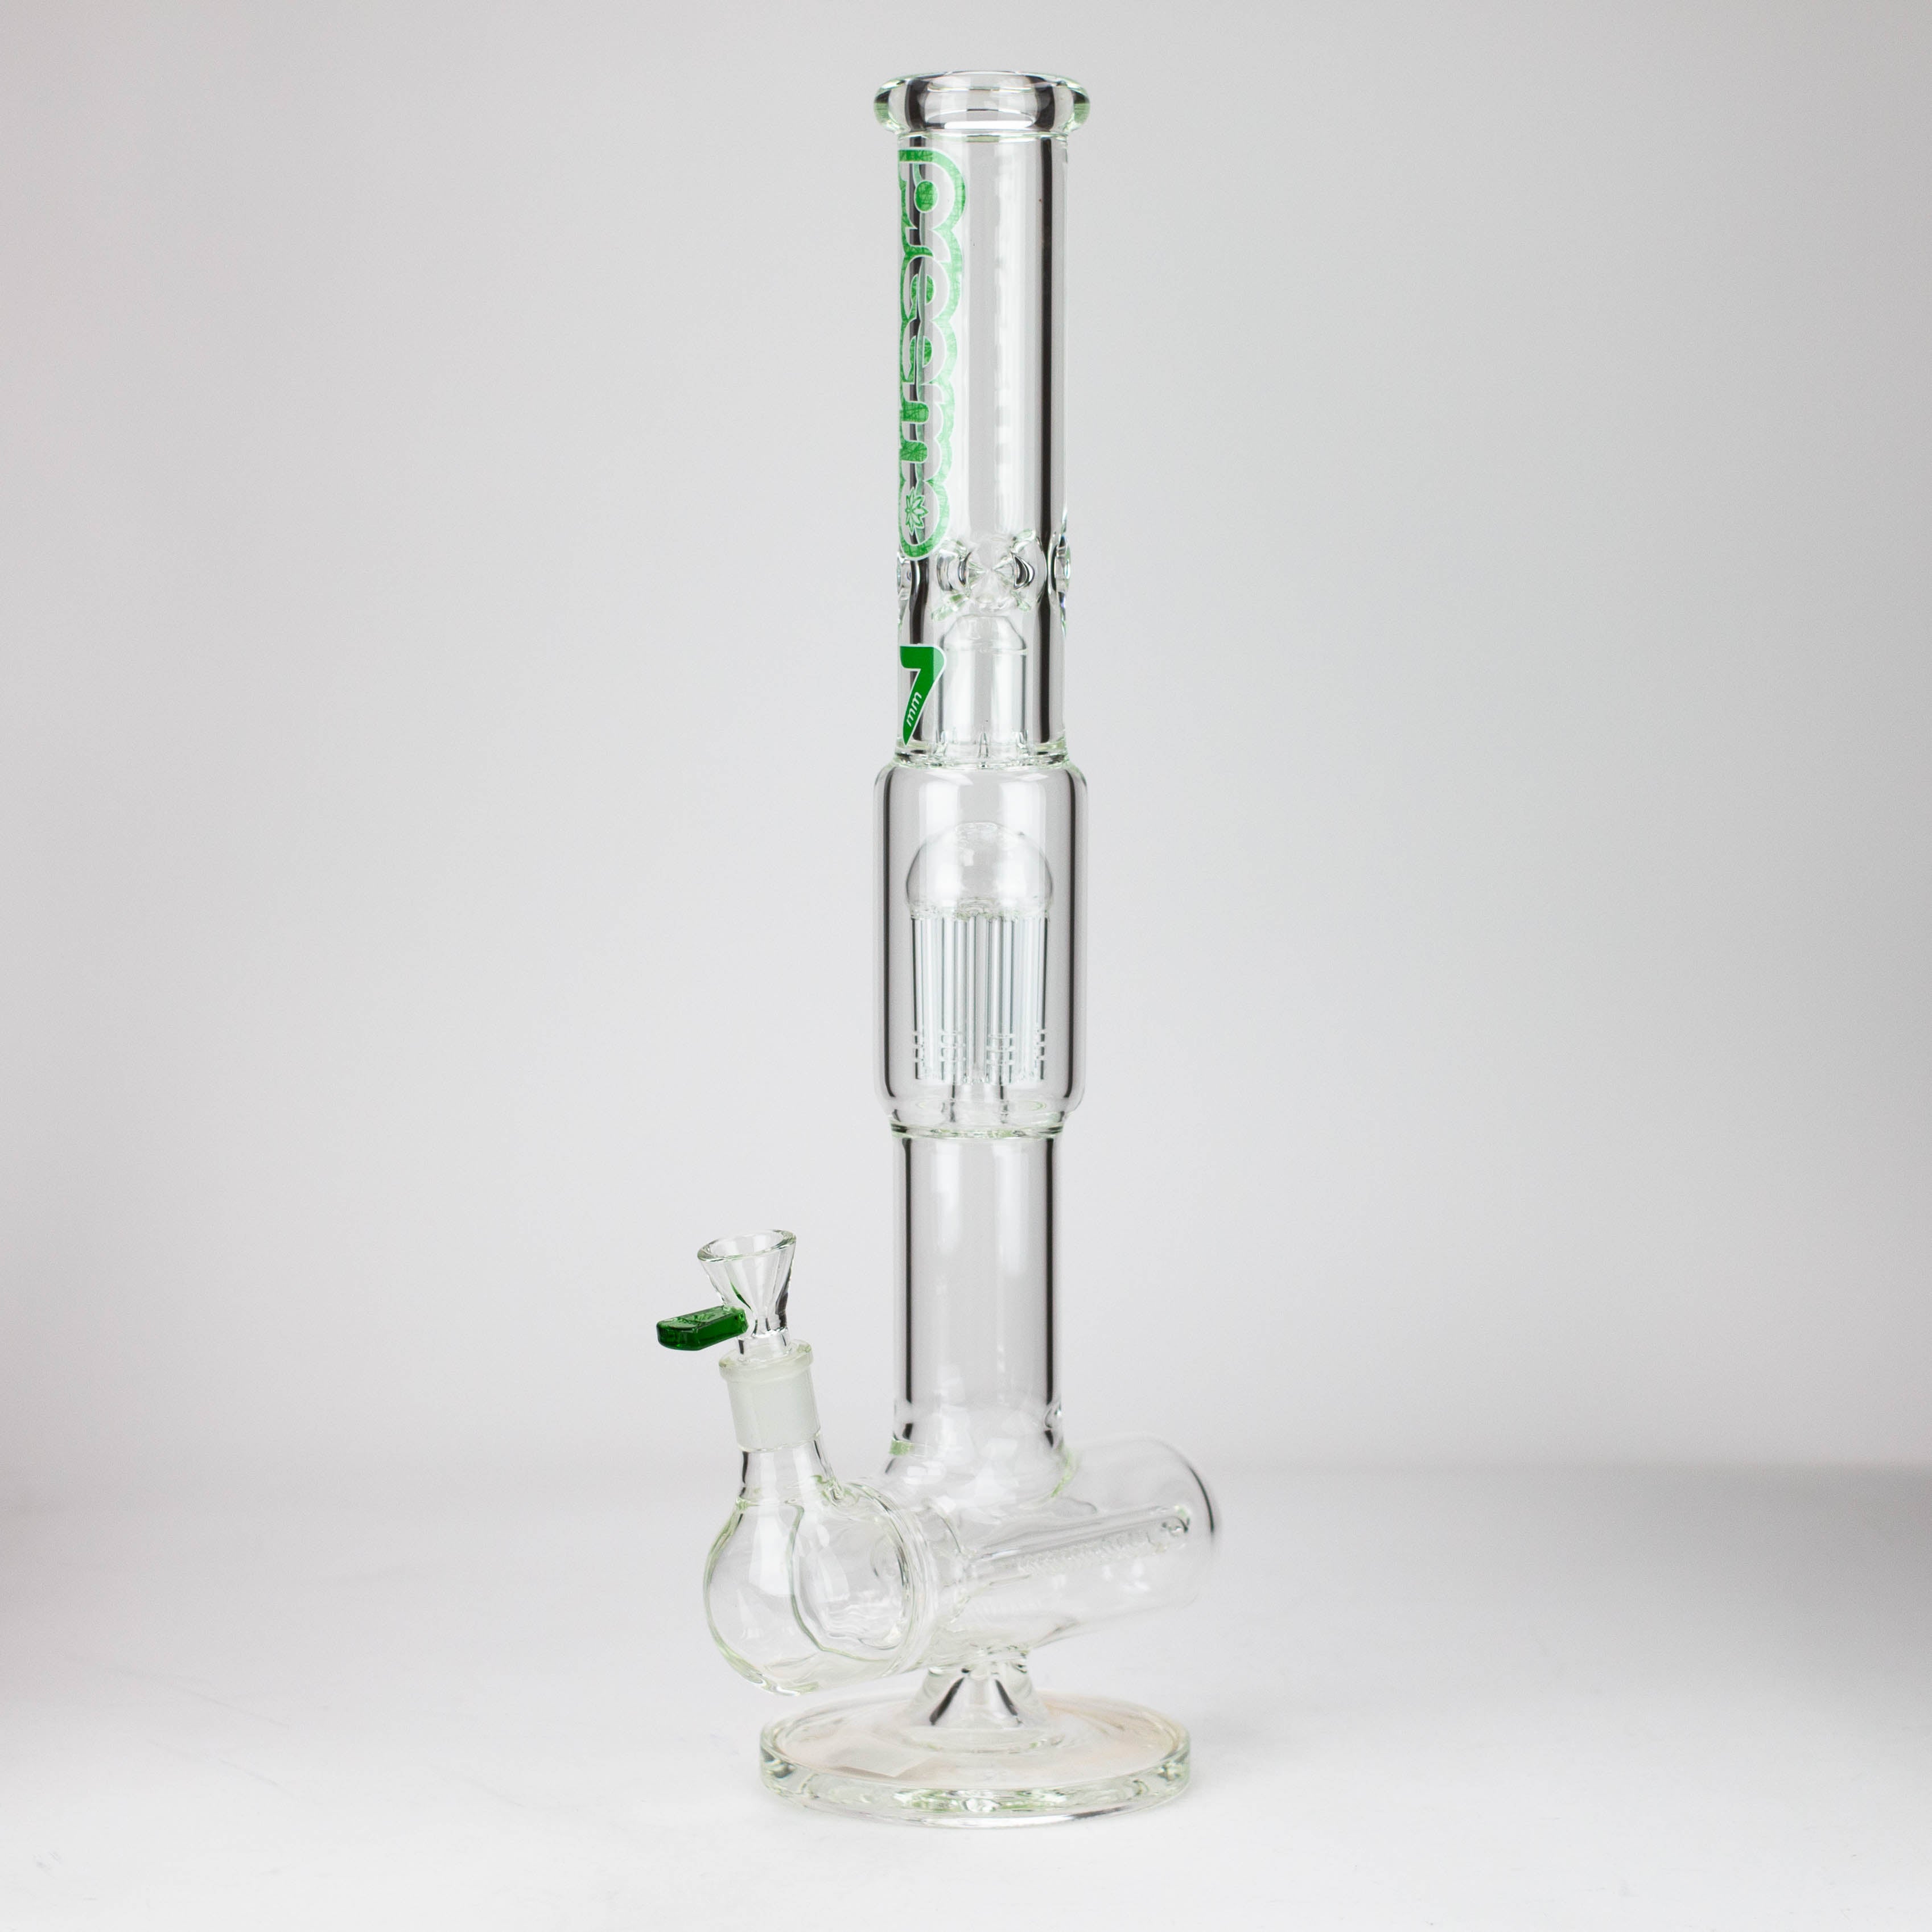 preemo - 20 inch Dome Over Triple Inline to Tree Perc_11